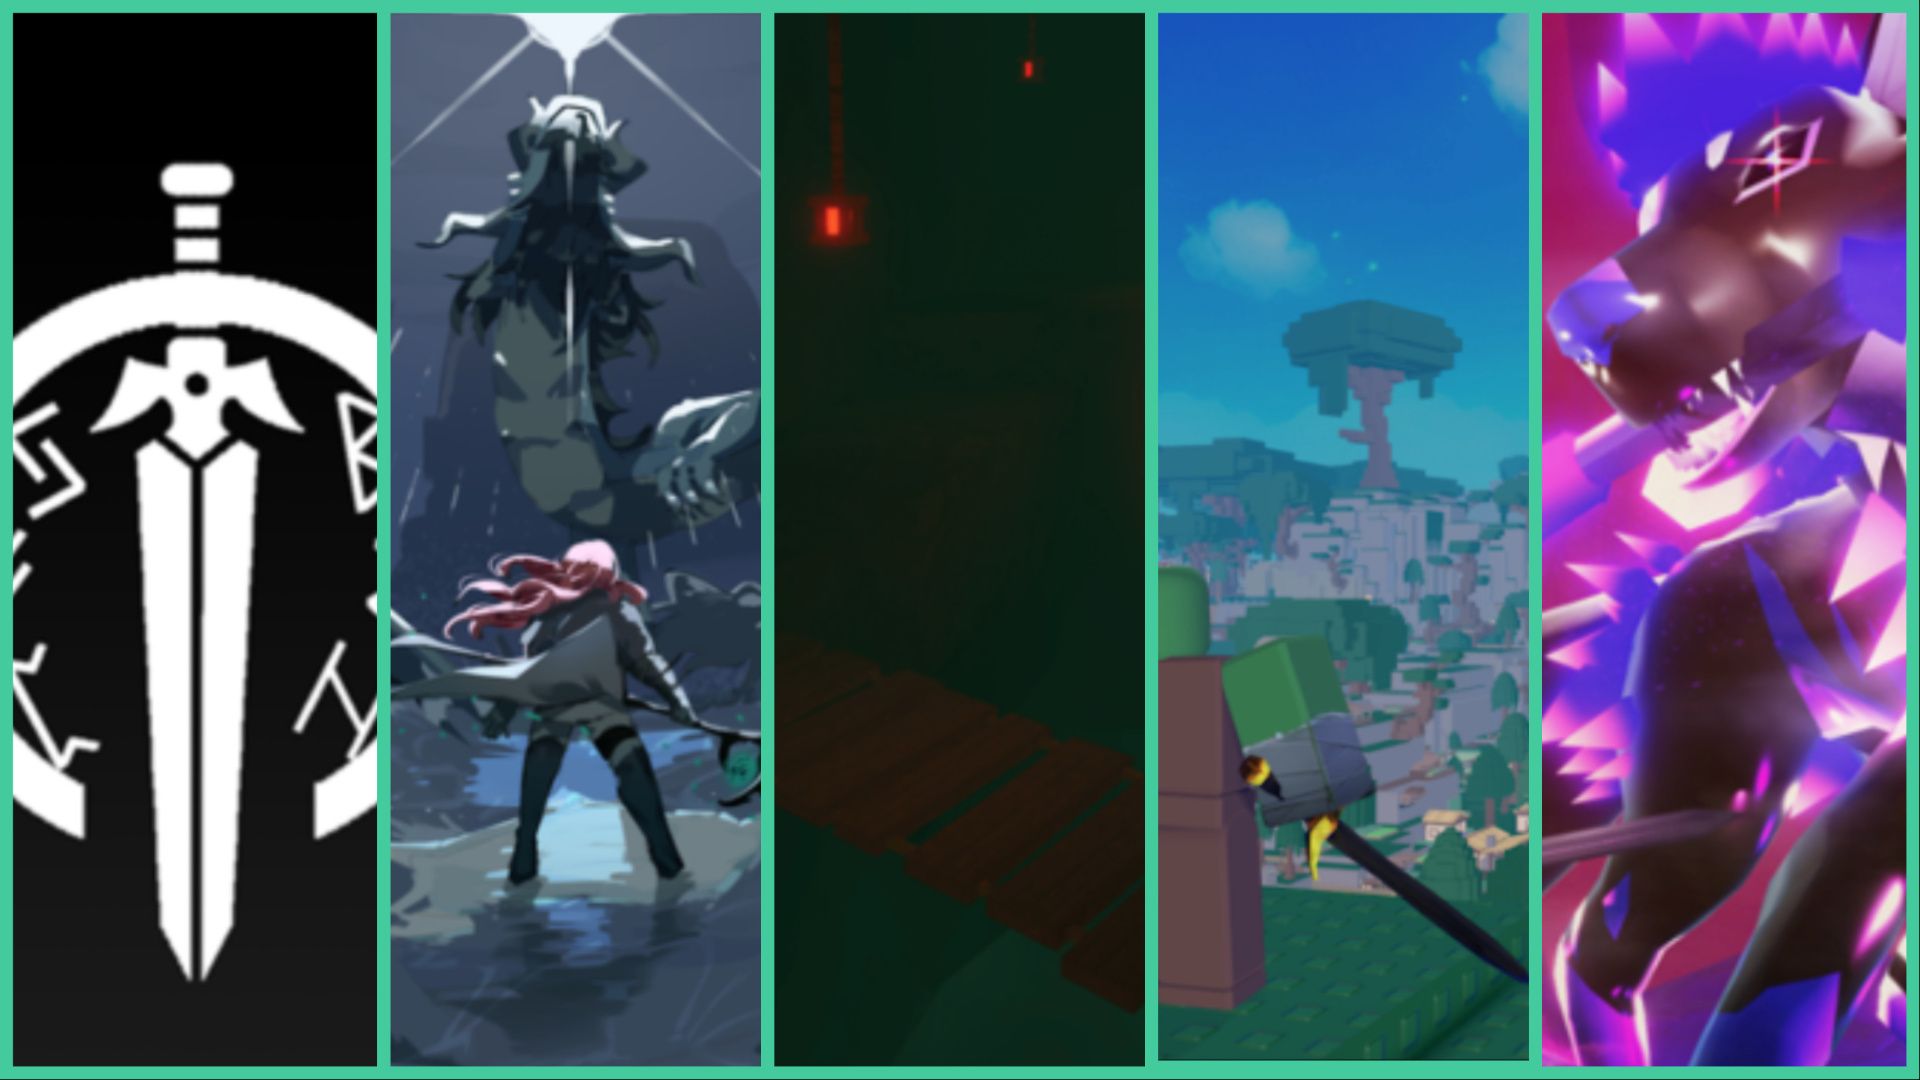 feature image for our best roblox rpgs feature, with a collage of 5 different promo images for 5 roblox rpgs, such as the promo art for arcane lineage of the sword within a circle, a zoomed crop of the promo art for deepwoken of a character holding a weapon while facing a giant dragonlike creature looking up to a floating glowing orb in the sky, a dark cavern with a bridge going across with glowing lanterns in the distance on chains, a view of the open world of shadovia with mountains and trees, and a close up of a wolf boss in swordburst 3 which is glowing from the purple crystals on its body